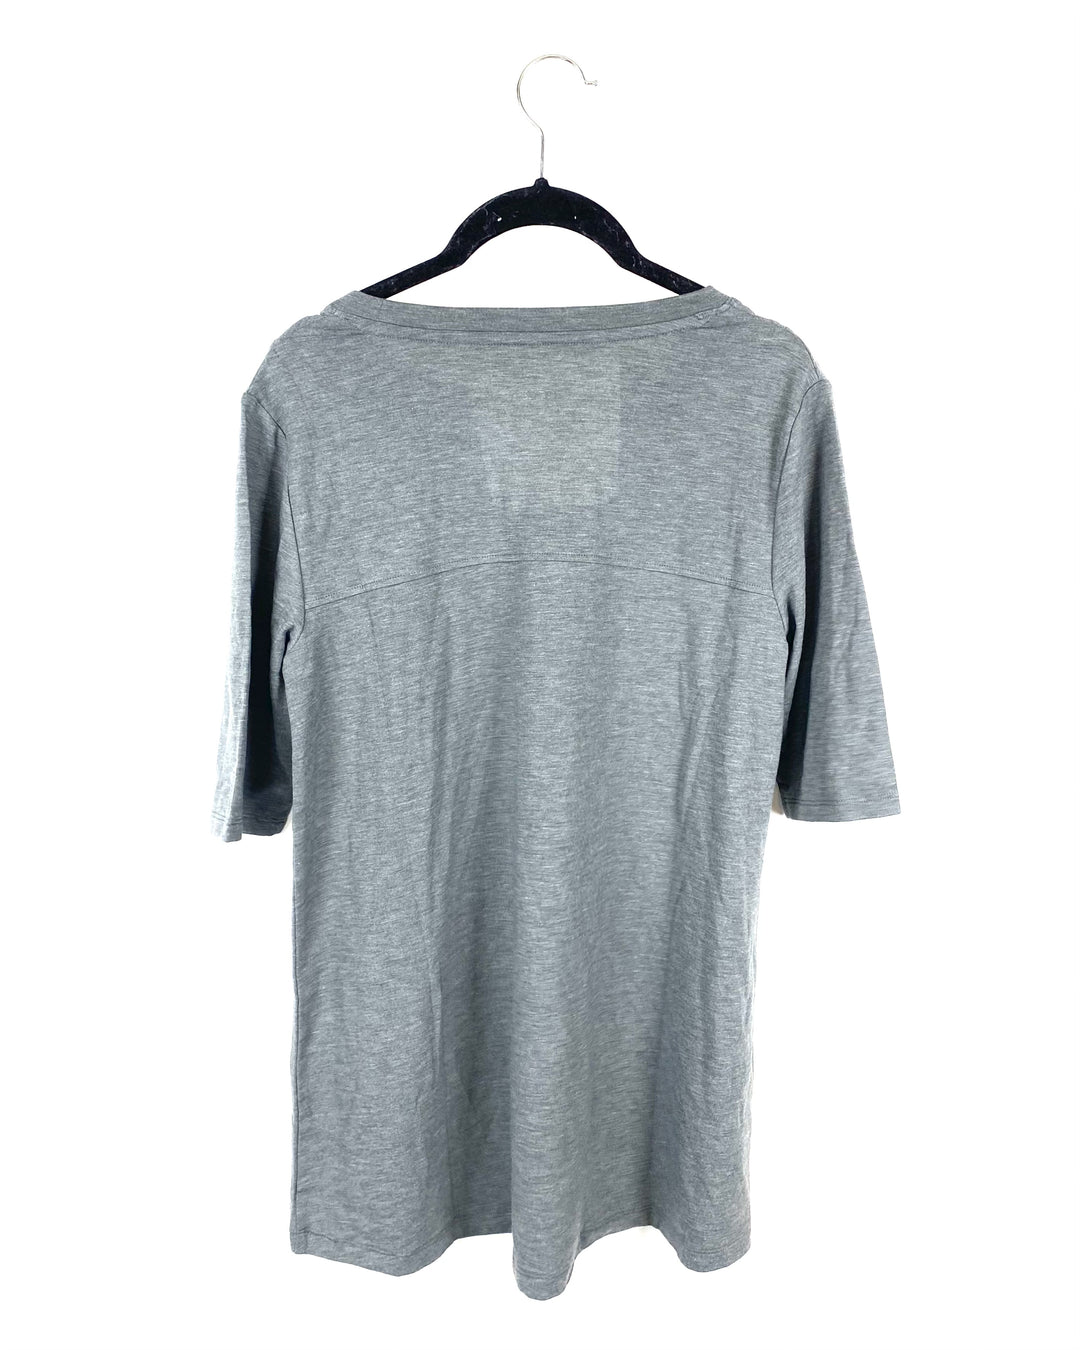 Grey Short Sleeved Top - Extra Small and Small